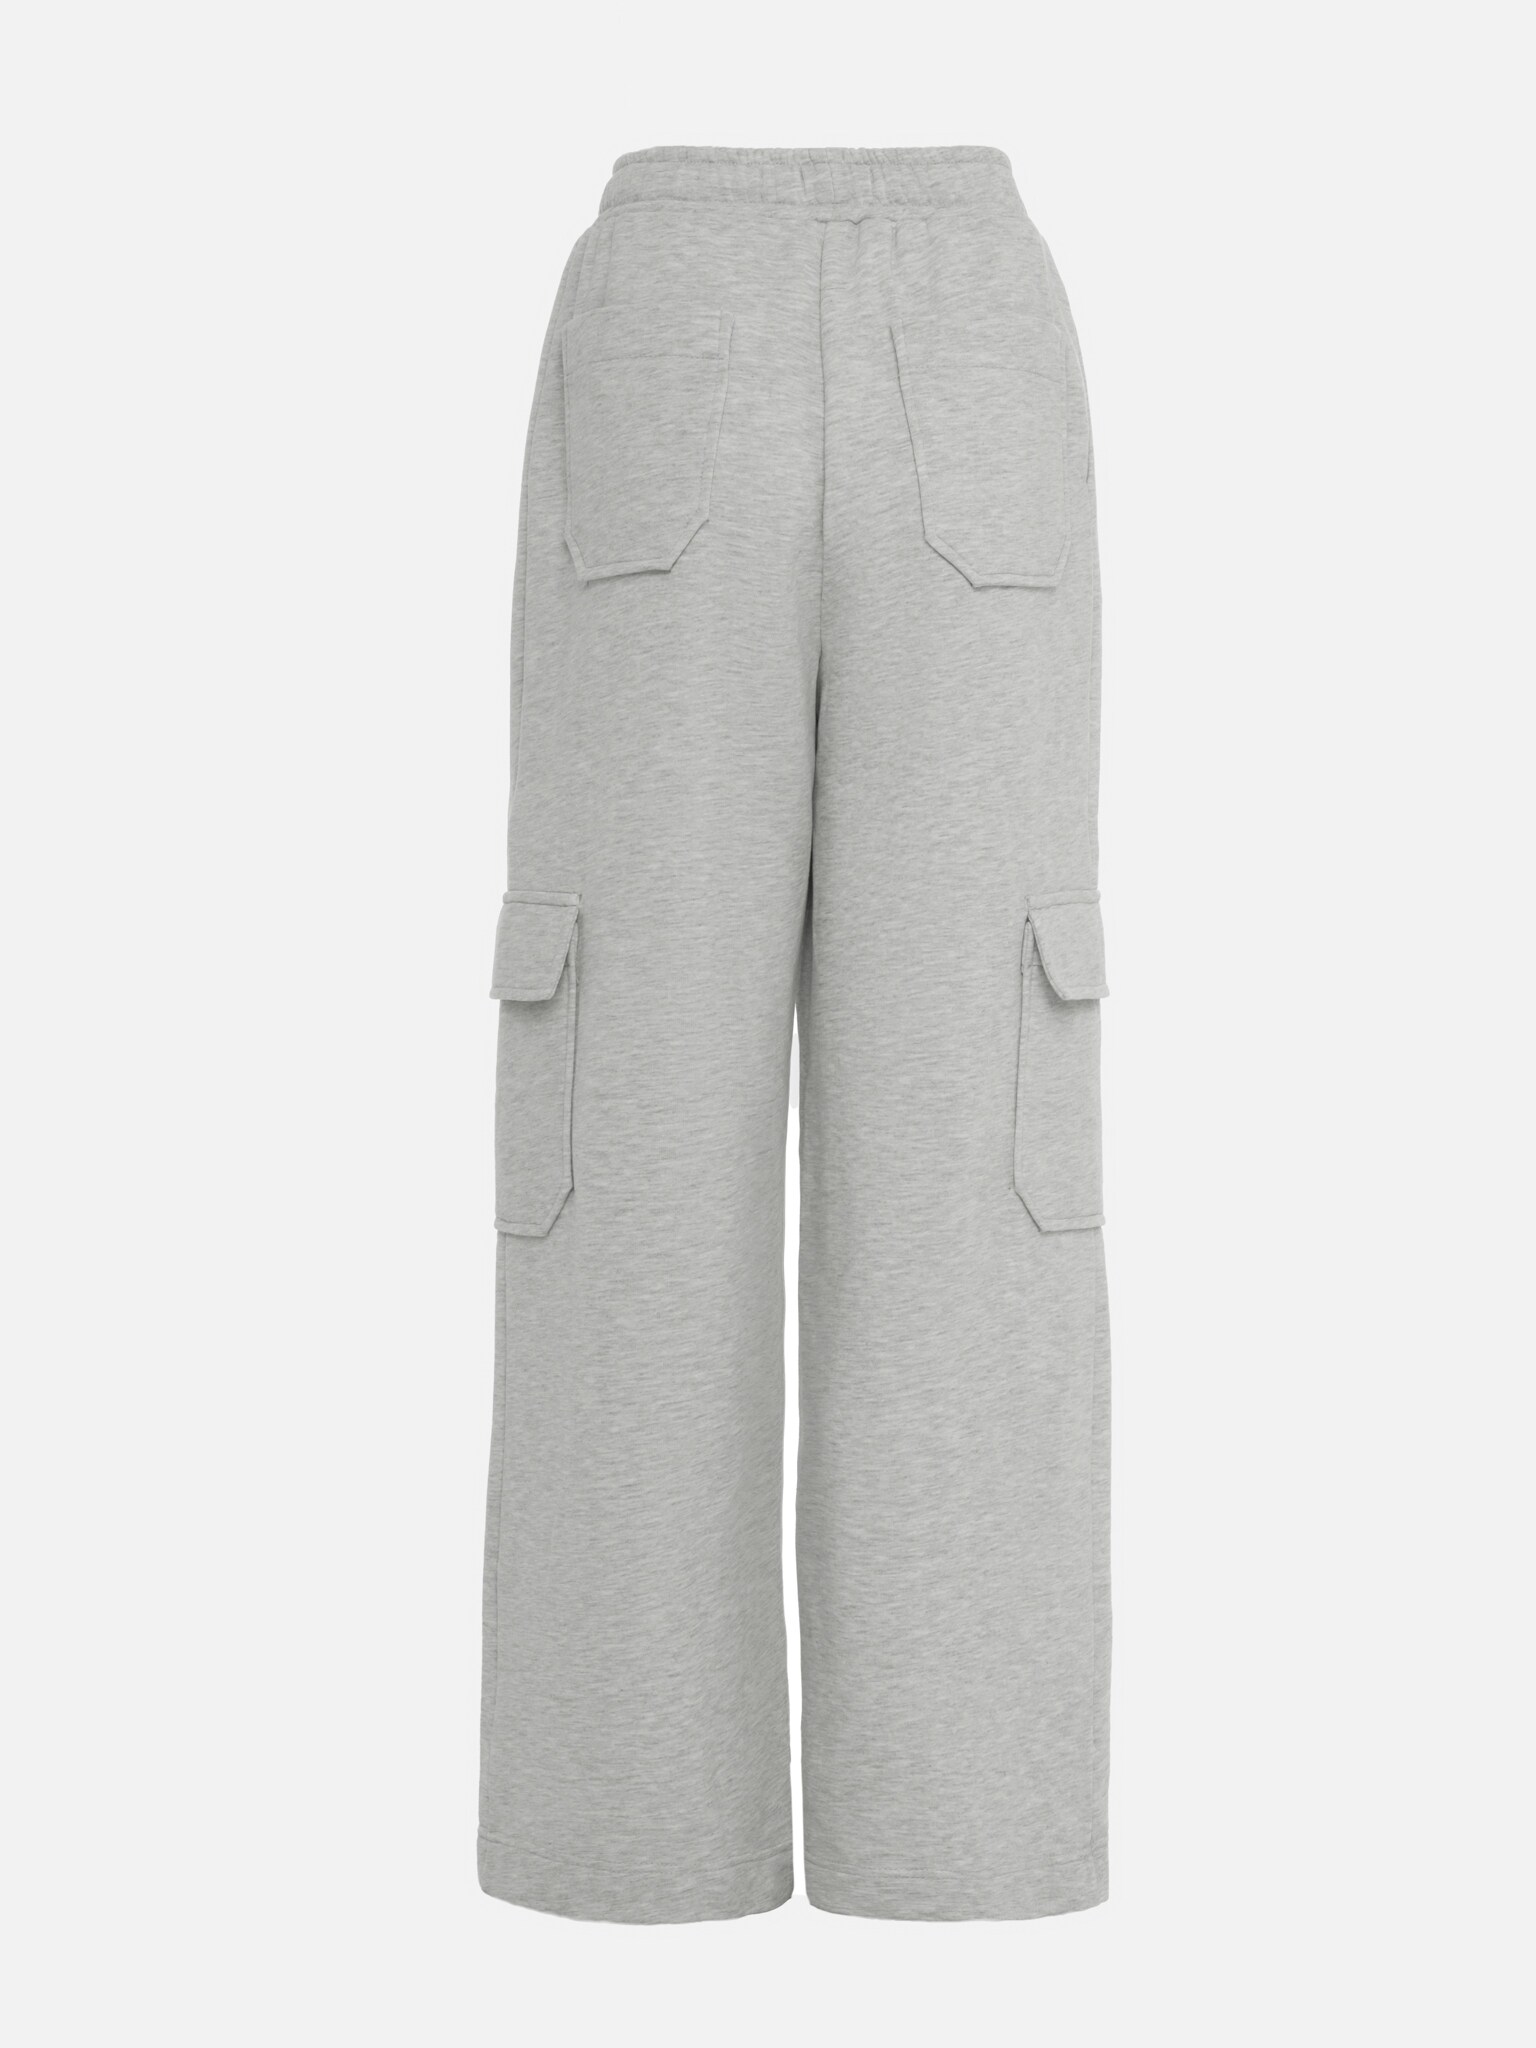 Free-fit knitted cargo trousers